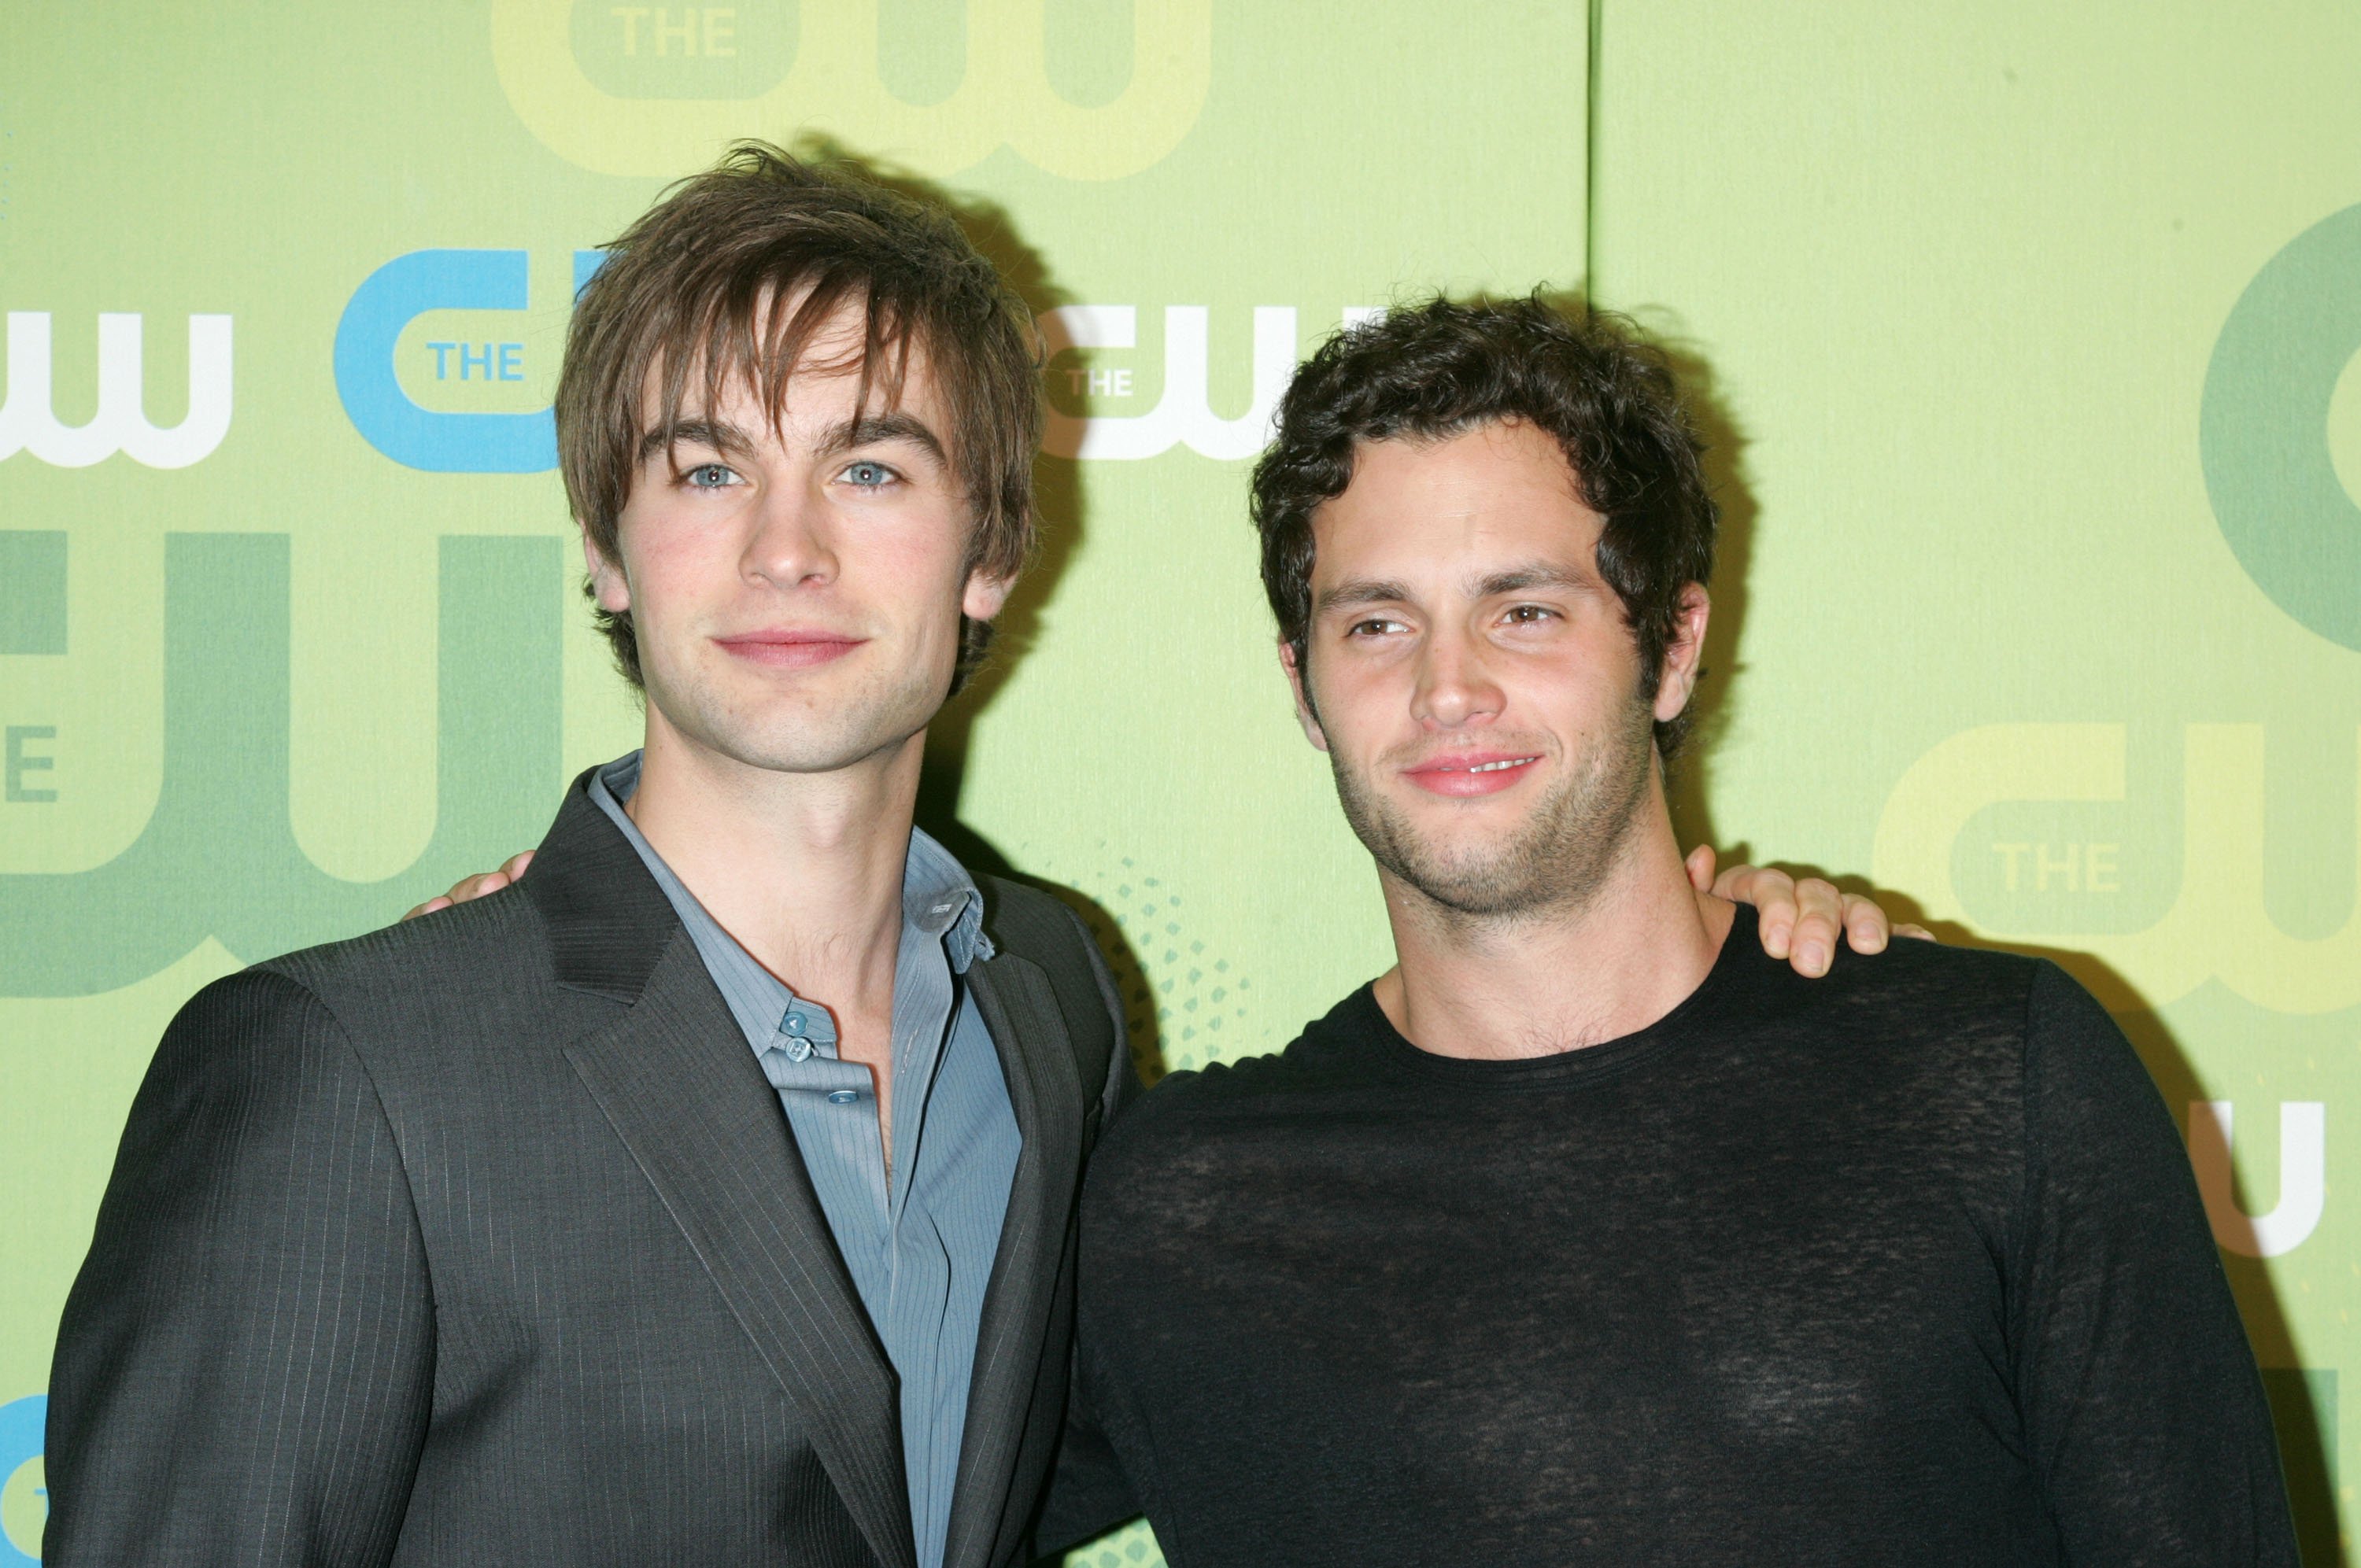 Chace Crawford and Penn Badgley attend the 2009 The CW Network UpFront on May 21, 2009 in New York City.